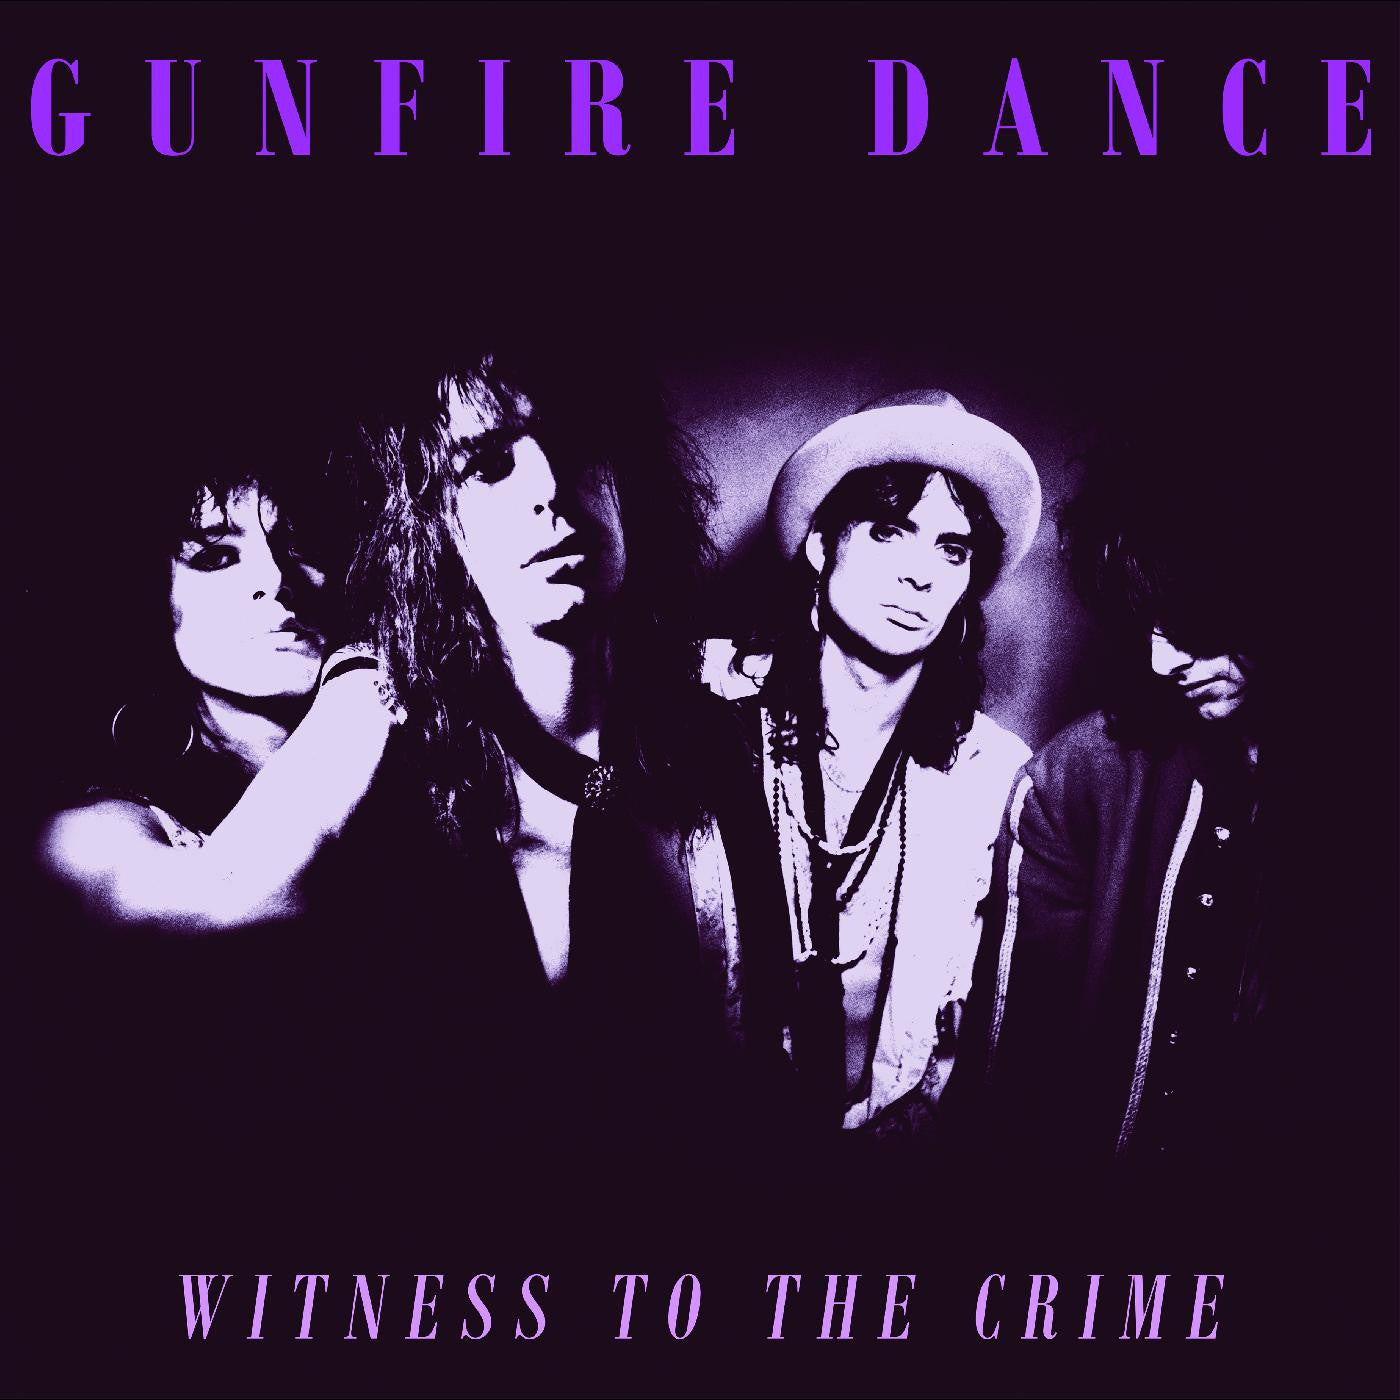 Gunfire Dance – Witness To The Crime [IMPORT UK Punk Rock / Hard Rock Glam Swagger 1991] – New LP